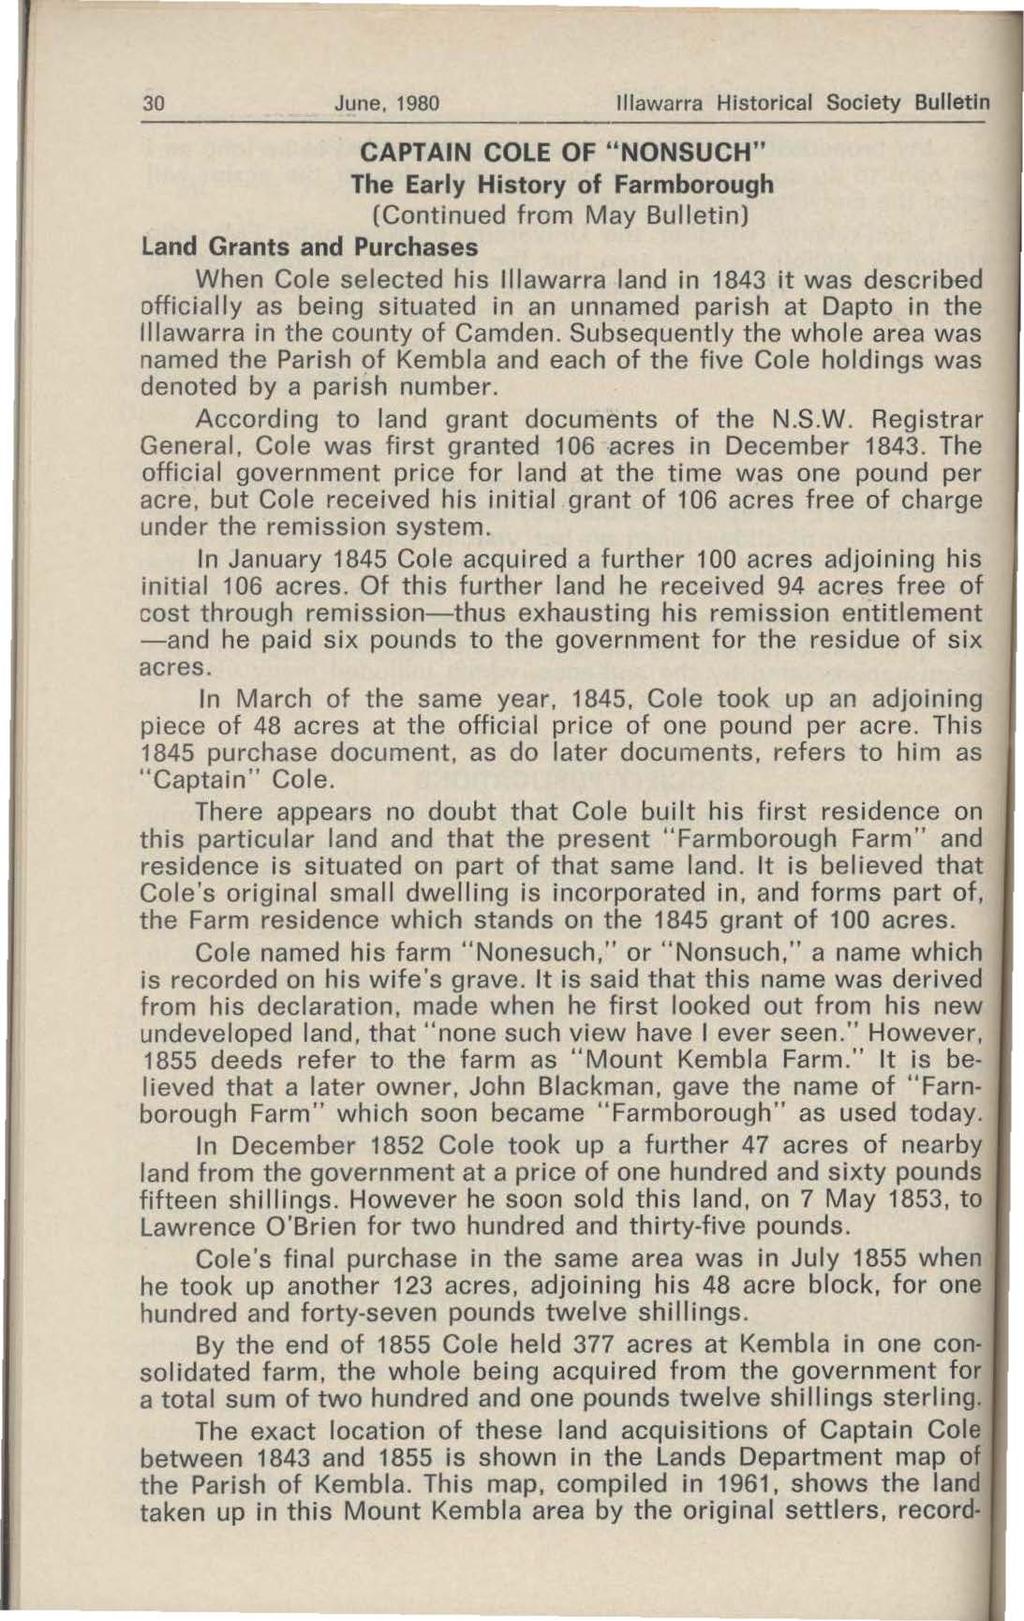 30 June, 1980 lllawarra Historical Society Bulletin CAPTAIN COLE OF "NONSUCH" The Early History of Farmborough (Continued from May Bulletin) Land Grants and Purchases When Cole selected his lllawarra